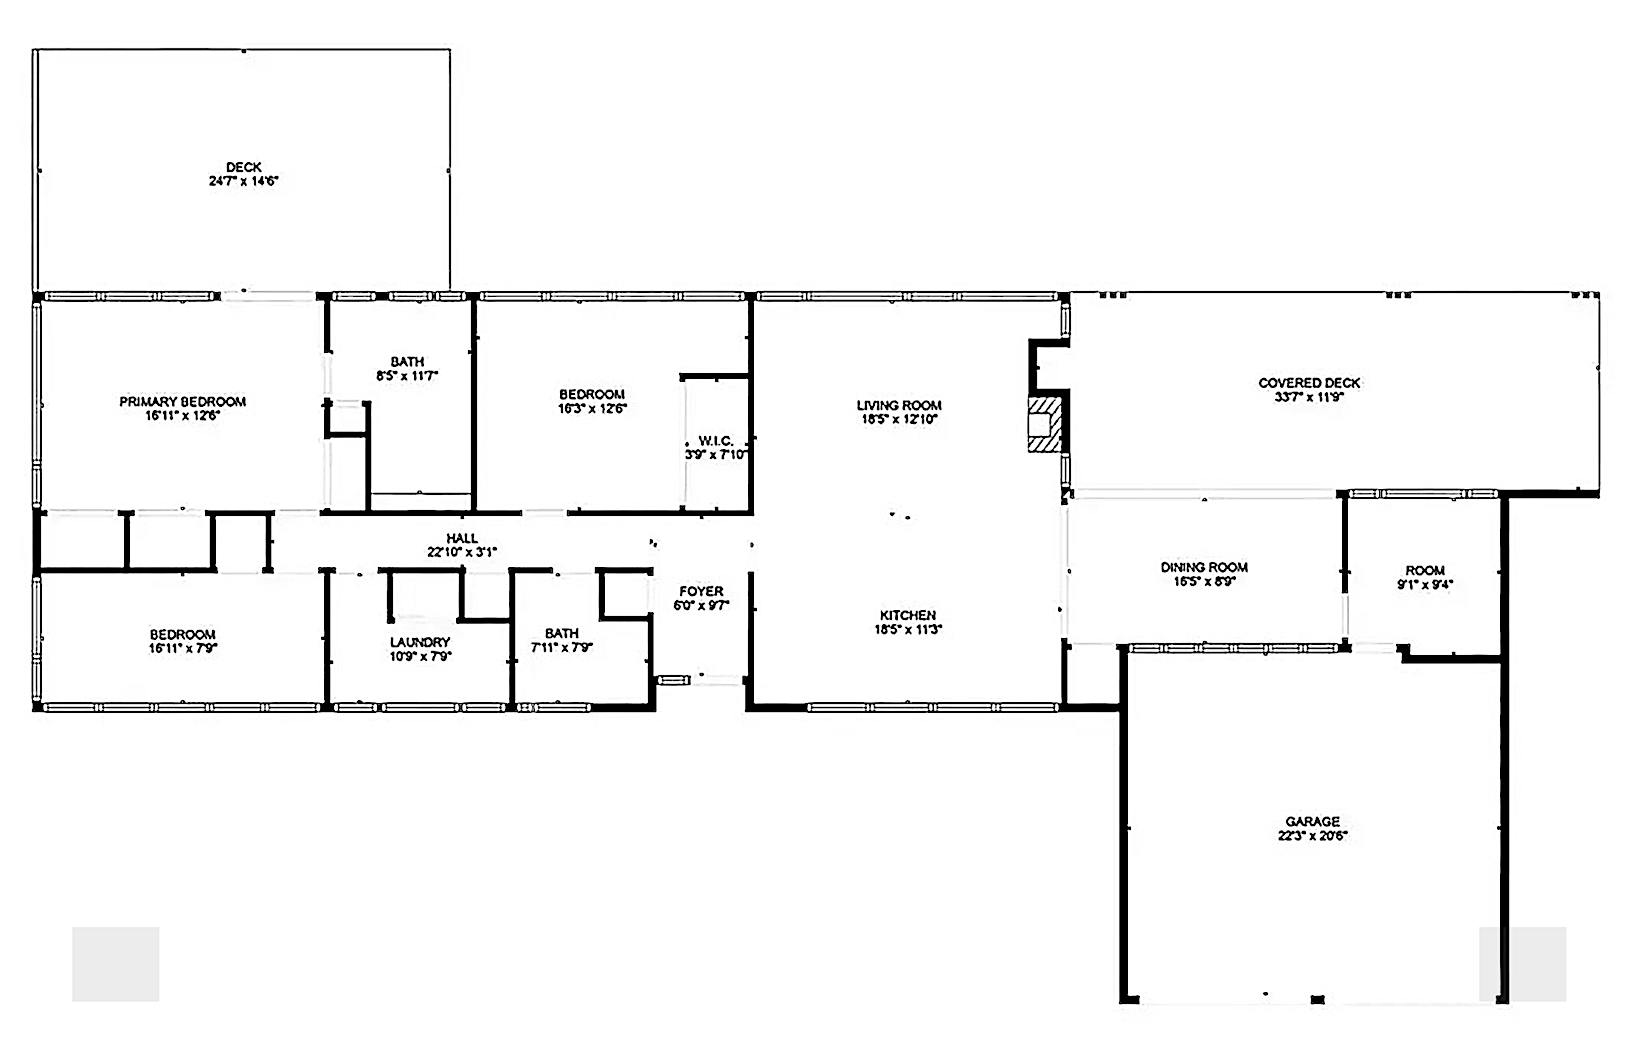 A floor plan illustrating a primary bedroom with an ensuite bath, two additional bedrooms, another bath, living room, kitchen, dining room, laundry, foyer, two decks, and a garage.